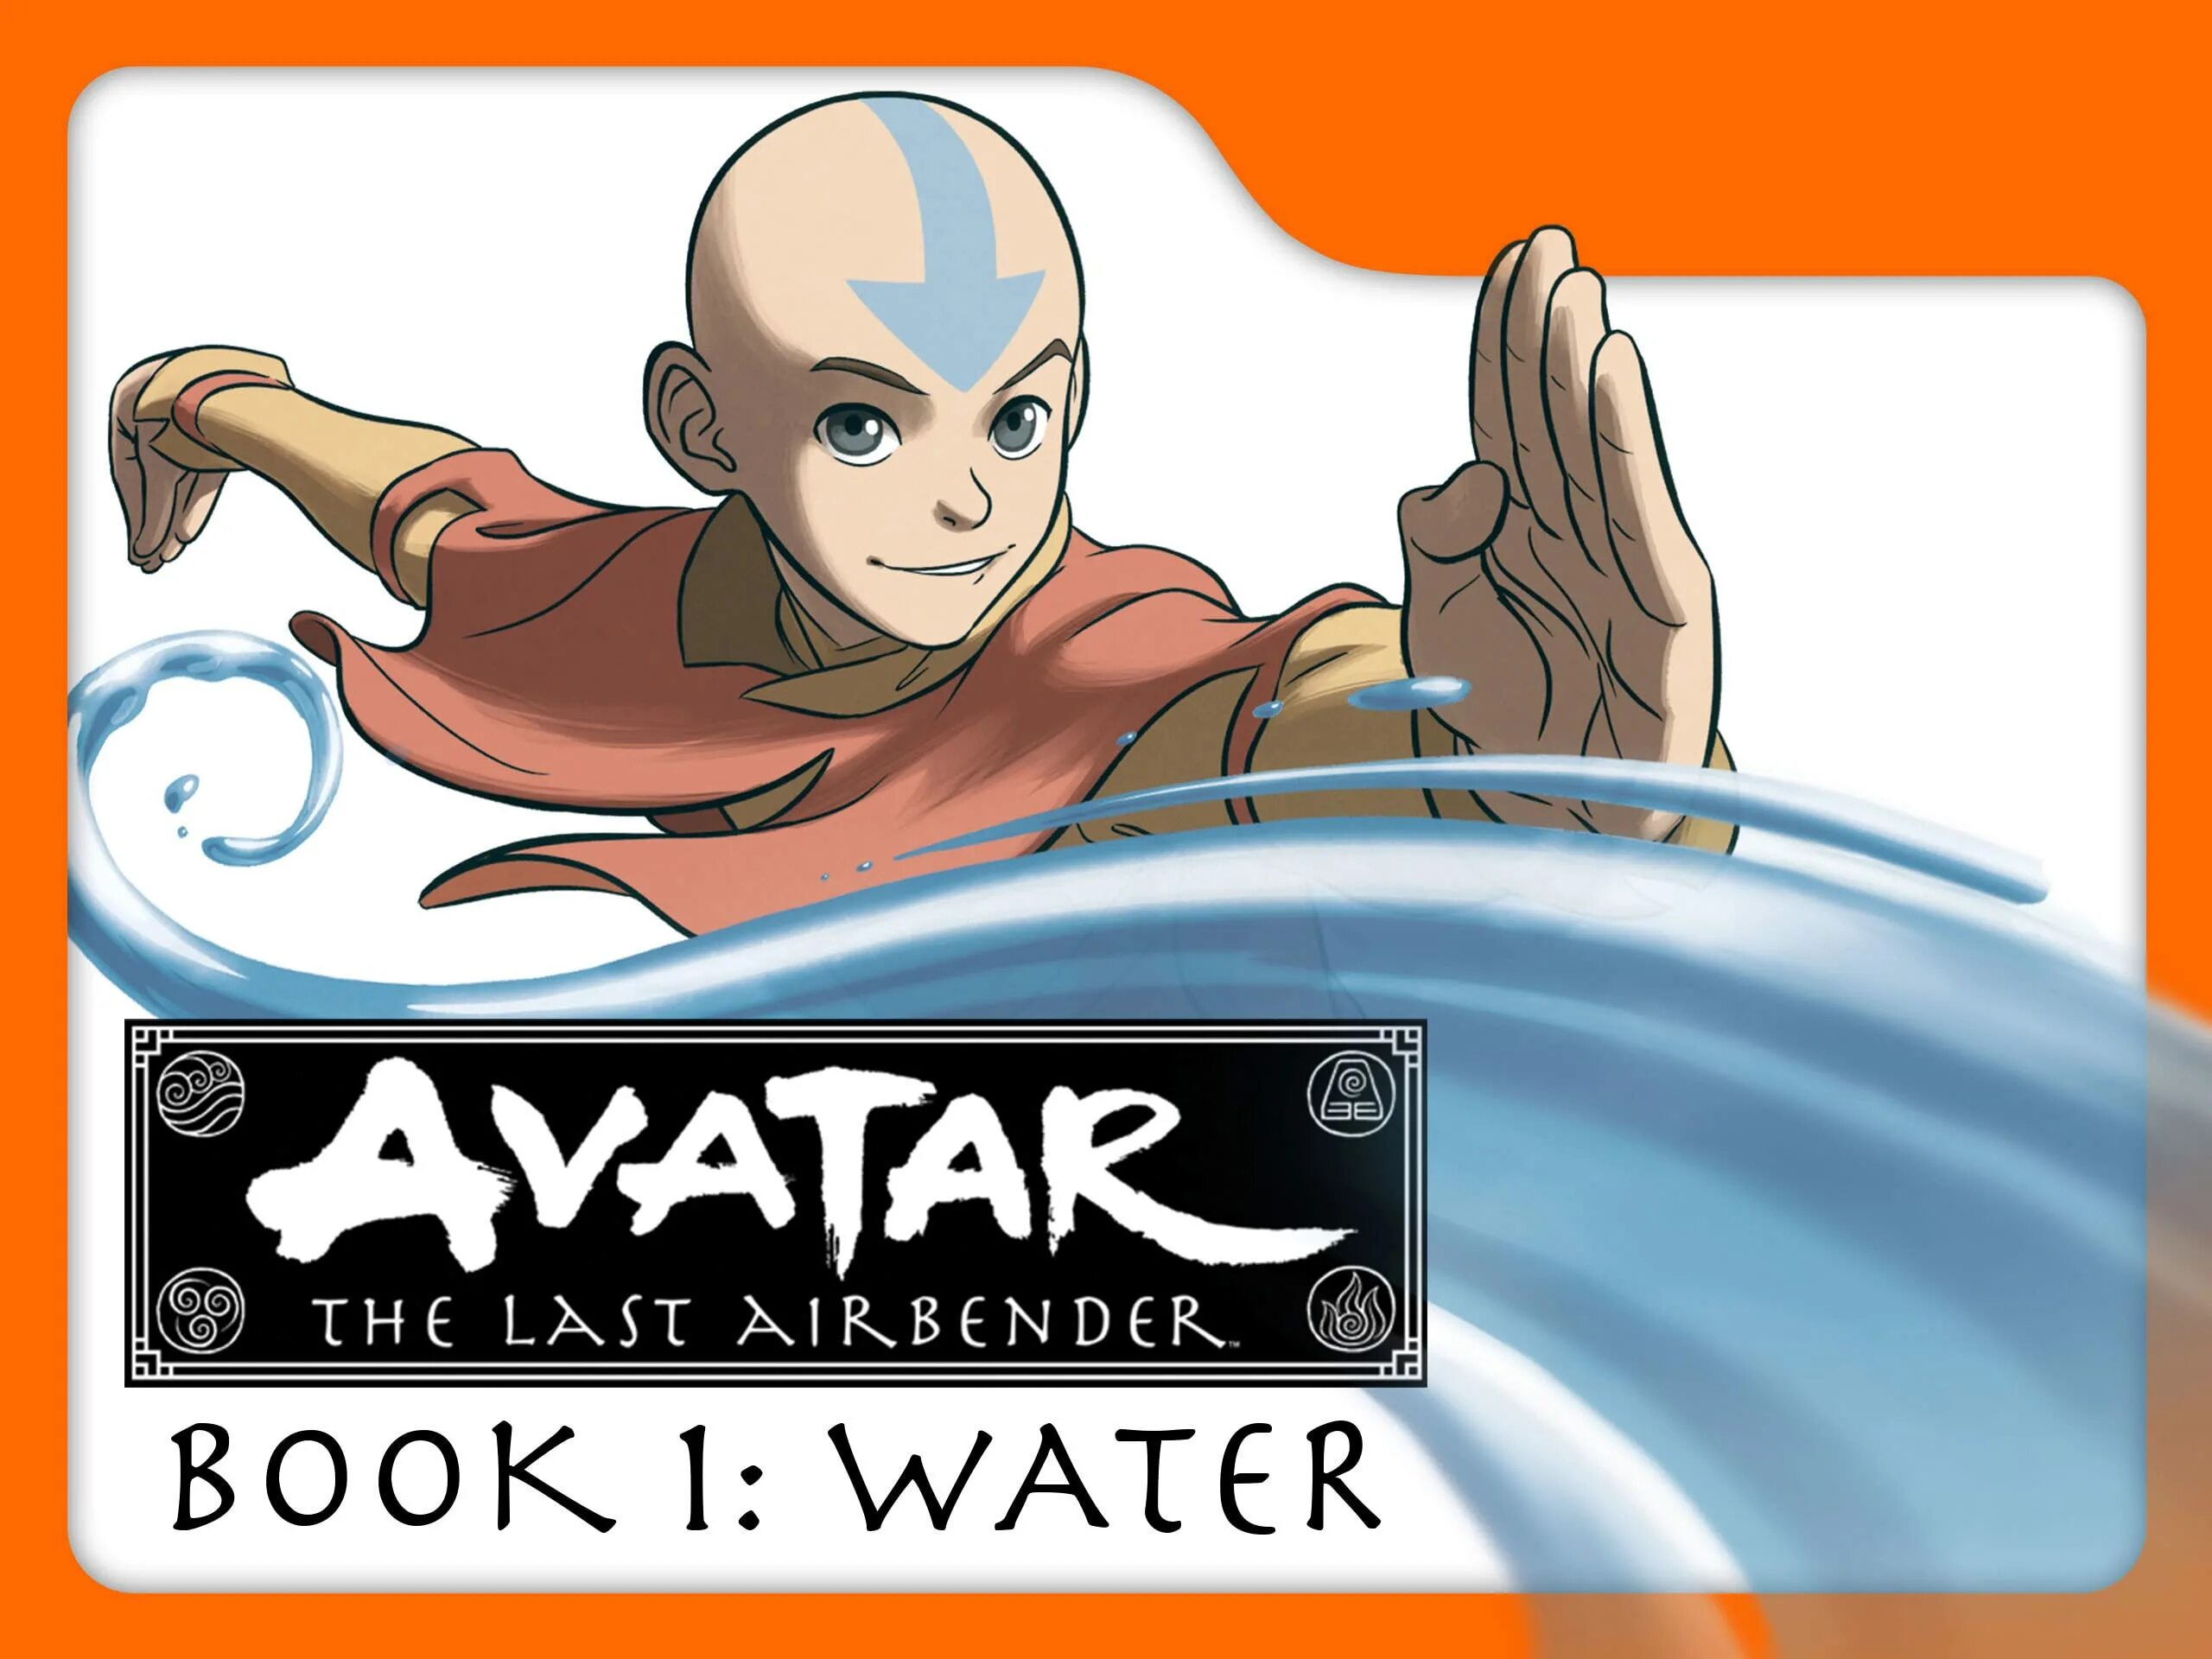 Avatar the last airbender in english. Аватар книга 1. Авангард аватар аанг. Avatar the last Airbender poster. Журнал аватар.